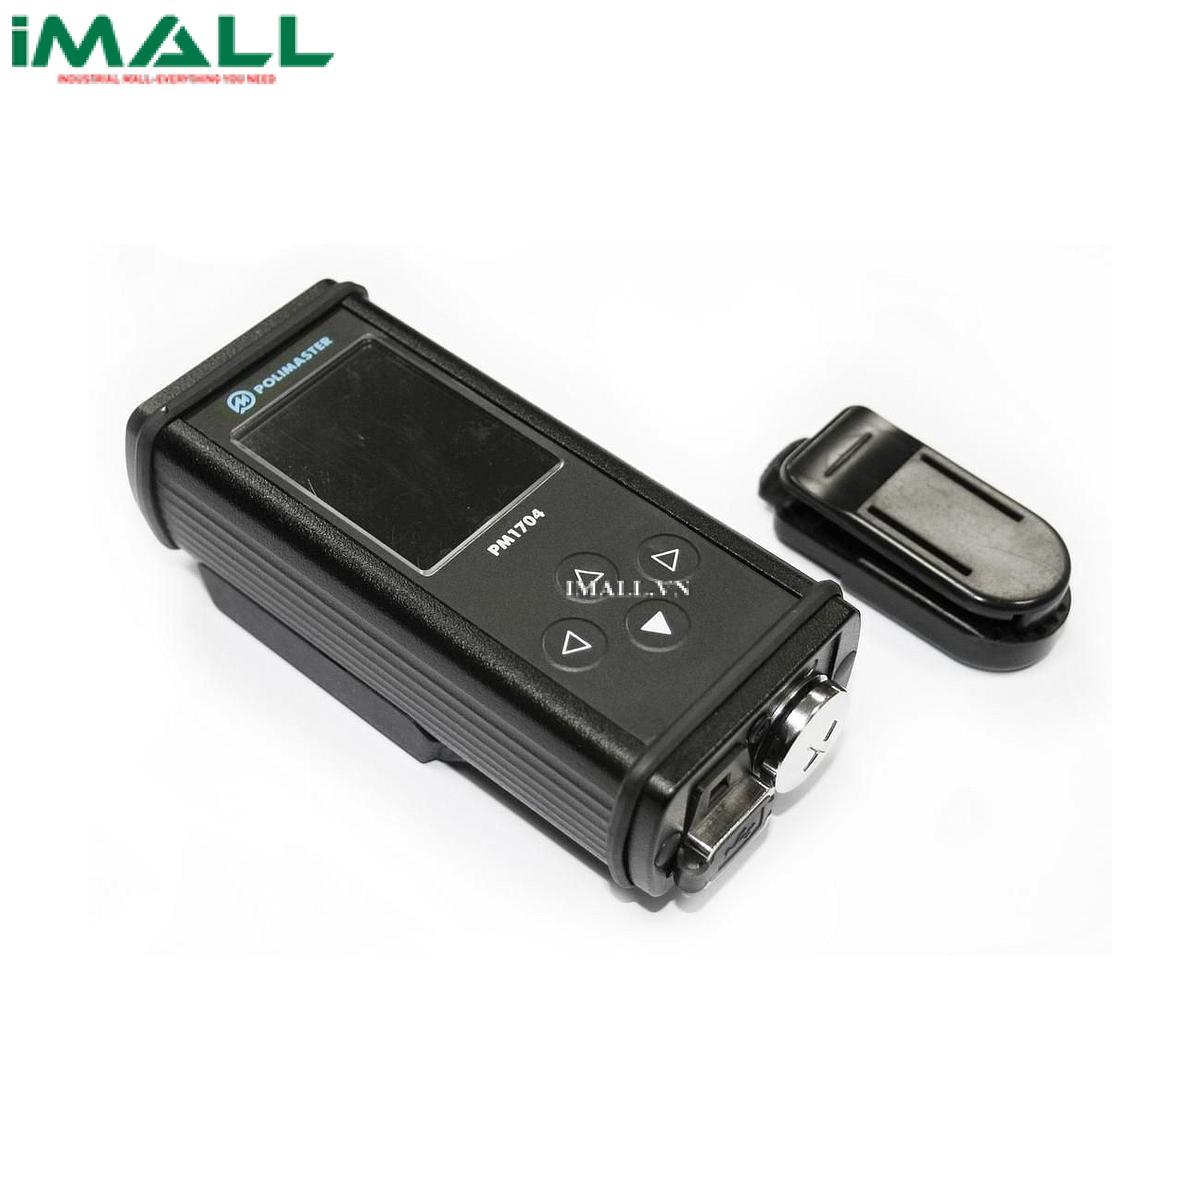 Spectroscopic Personal Radiation Detectors Polimaster PM1704M0